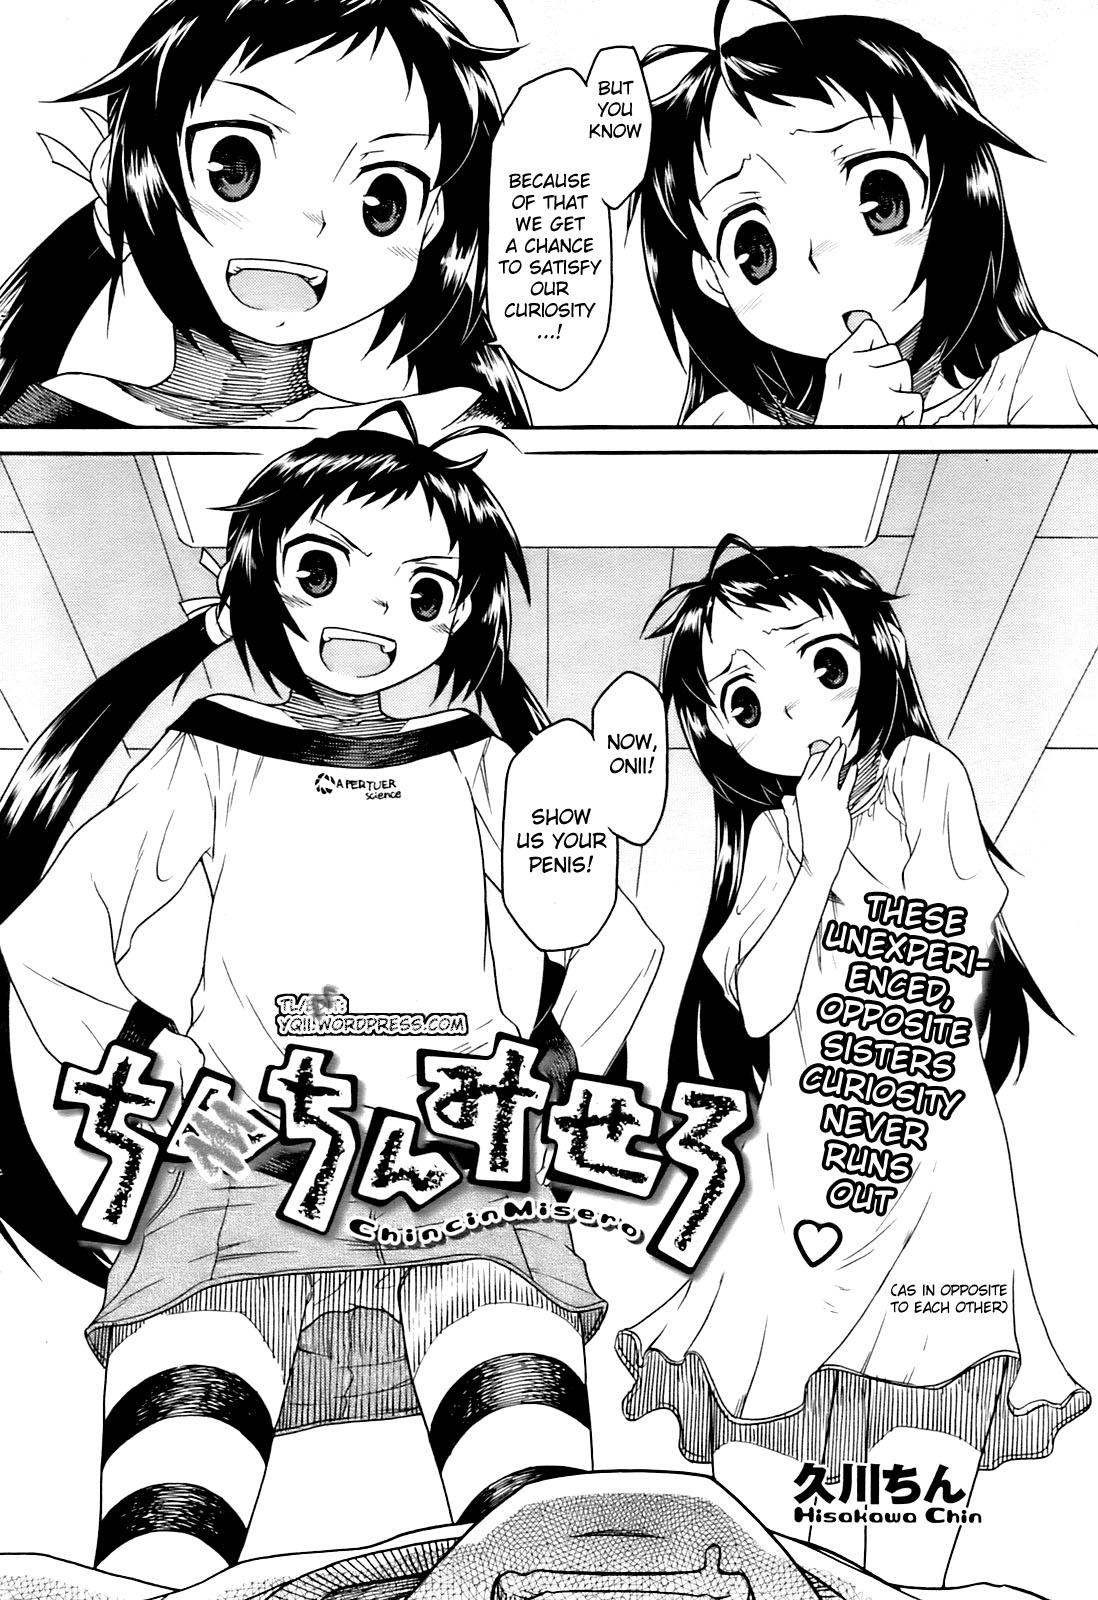 Smalltits Chinchin Misero | Show Us Your Penis Shy - Page 2